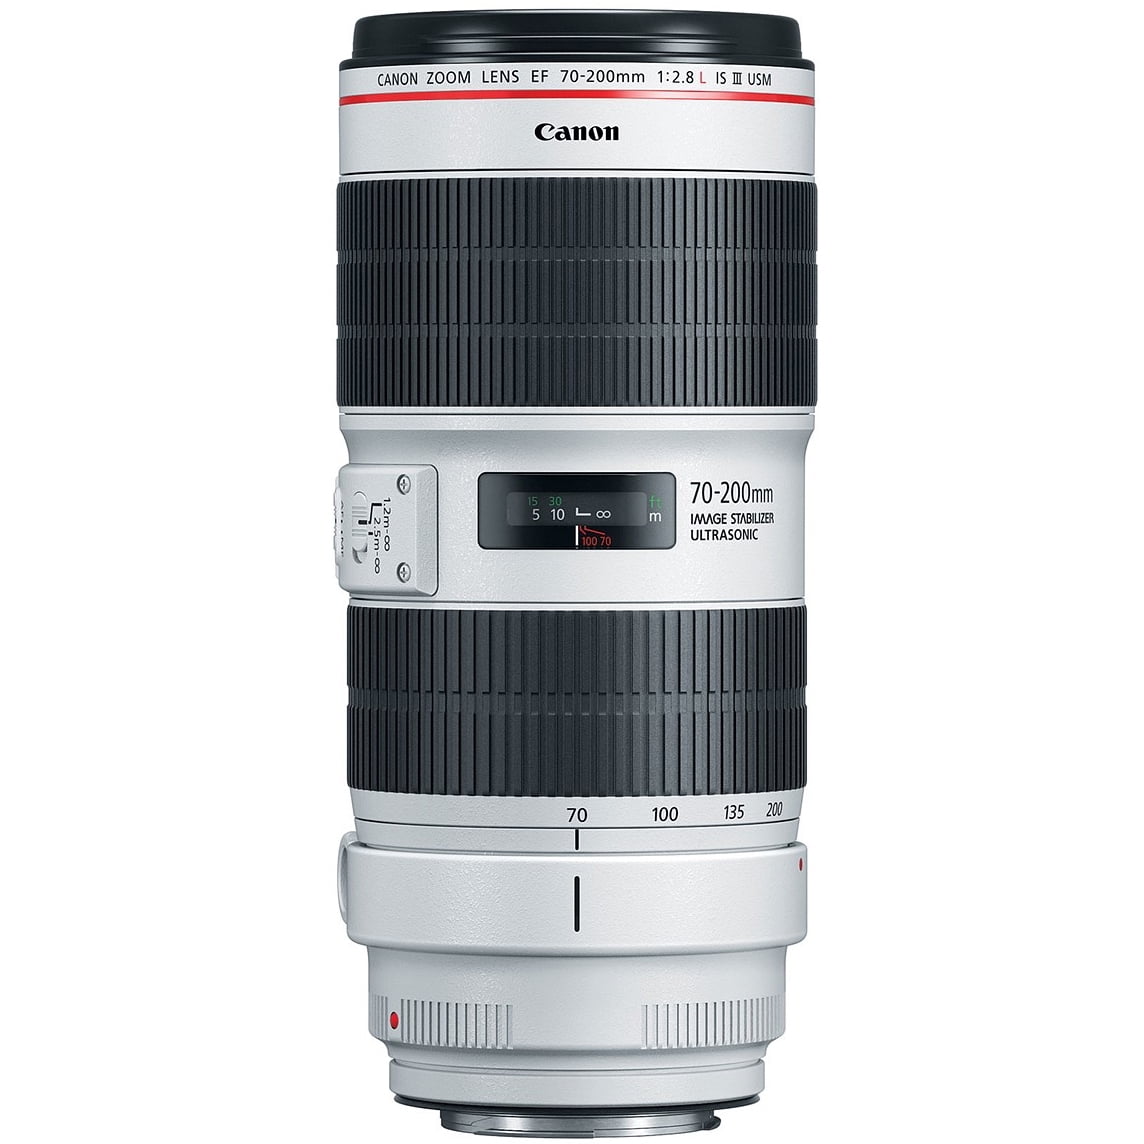 Canon USM Telephoto 70-200mm IS f/2.8L EF SLR Lens Cameras III for Digital 3044C002AA